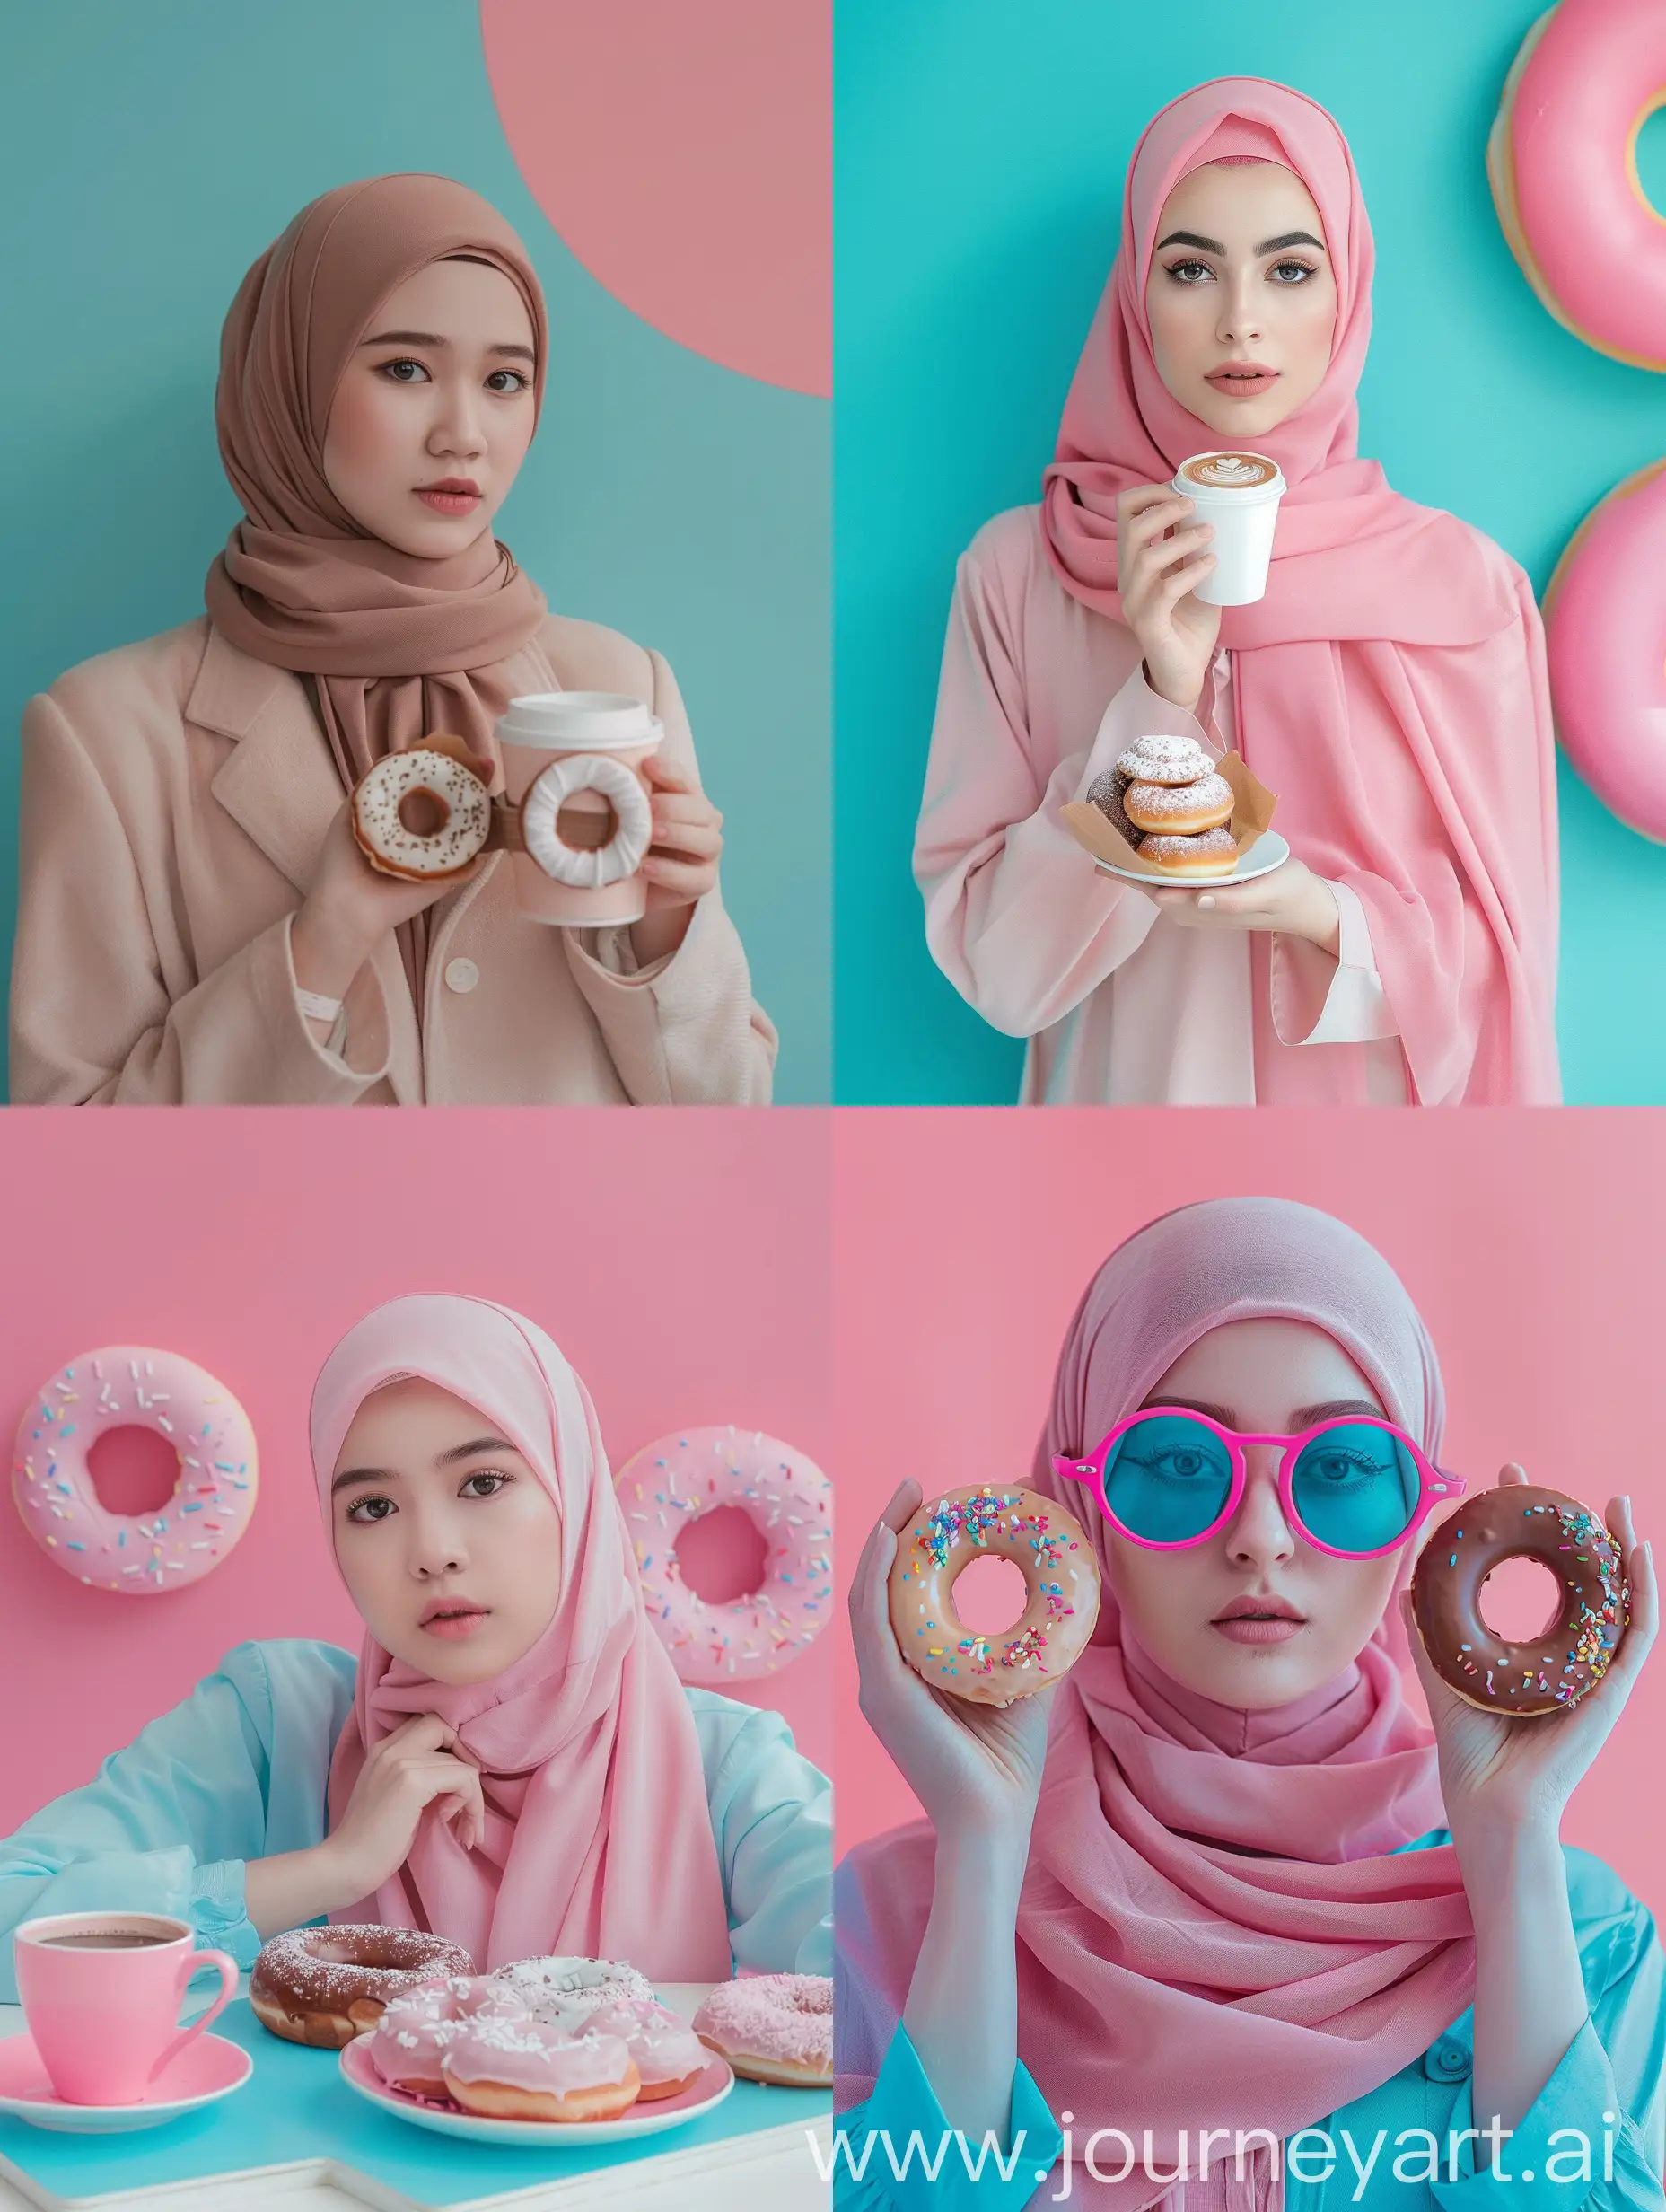 make a similar image without text, for a coffee shop application, with coffee and donuts and other pastries, let it be minimalistic and using pink and blue colors, the background in the same color, pink or blue, studio light, with a girl hijab model